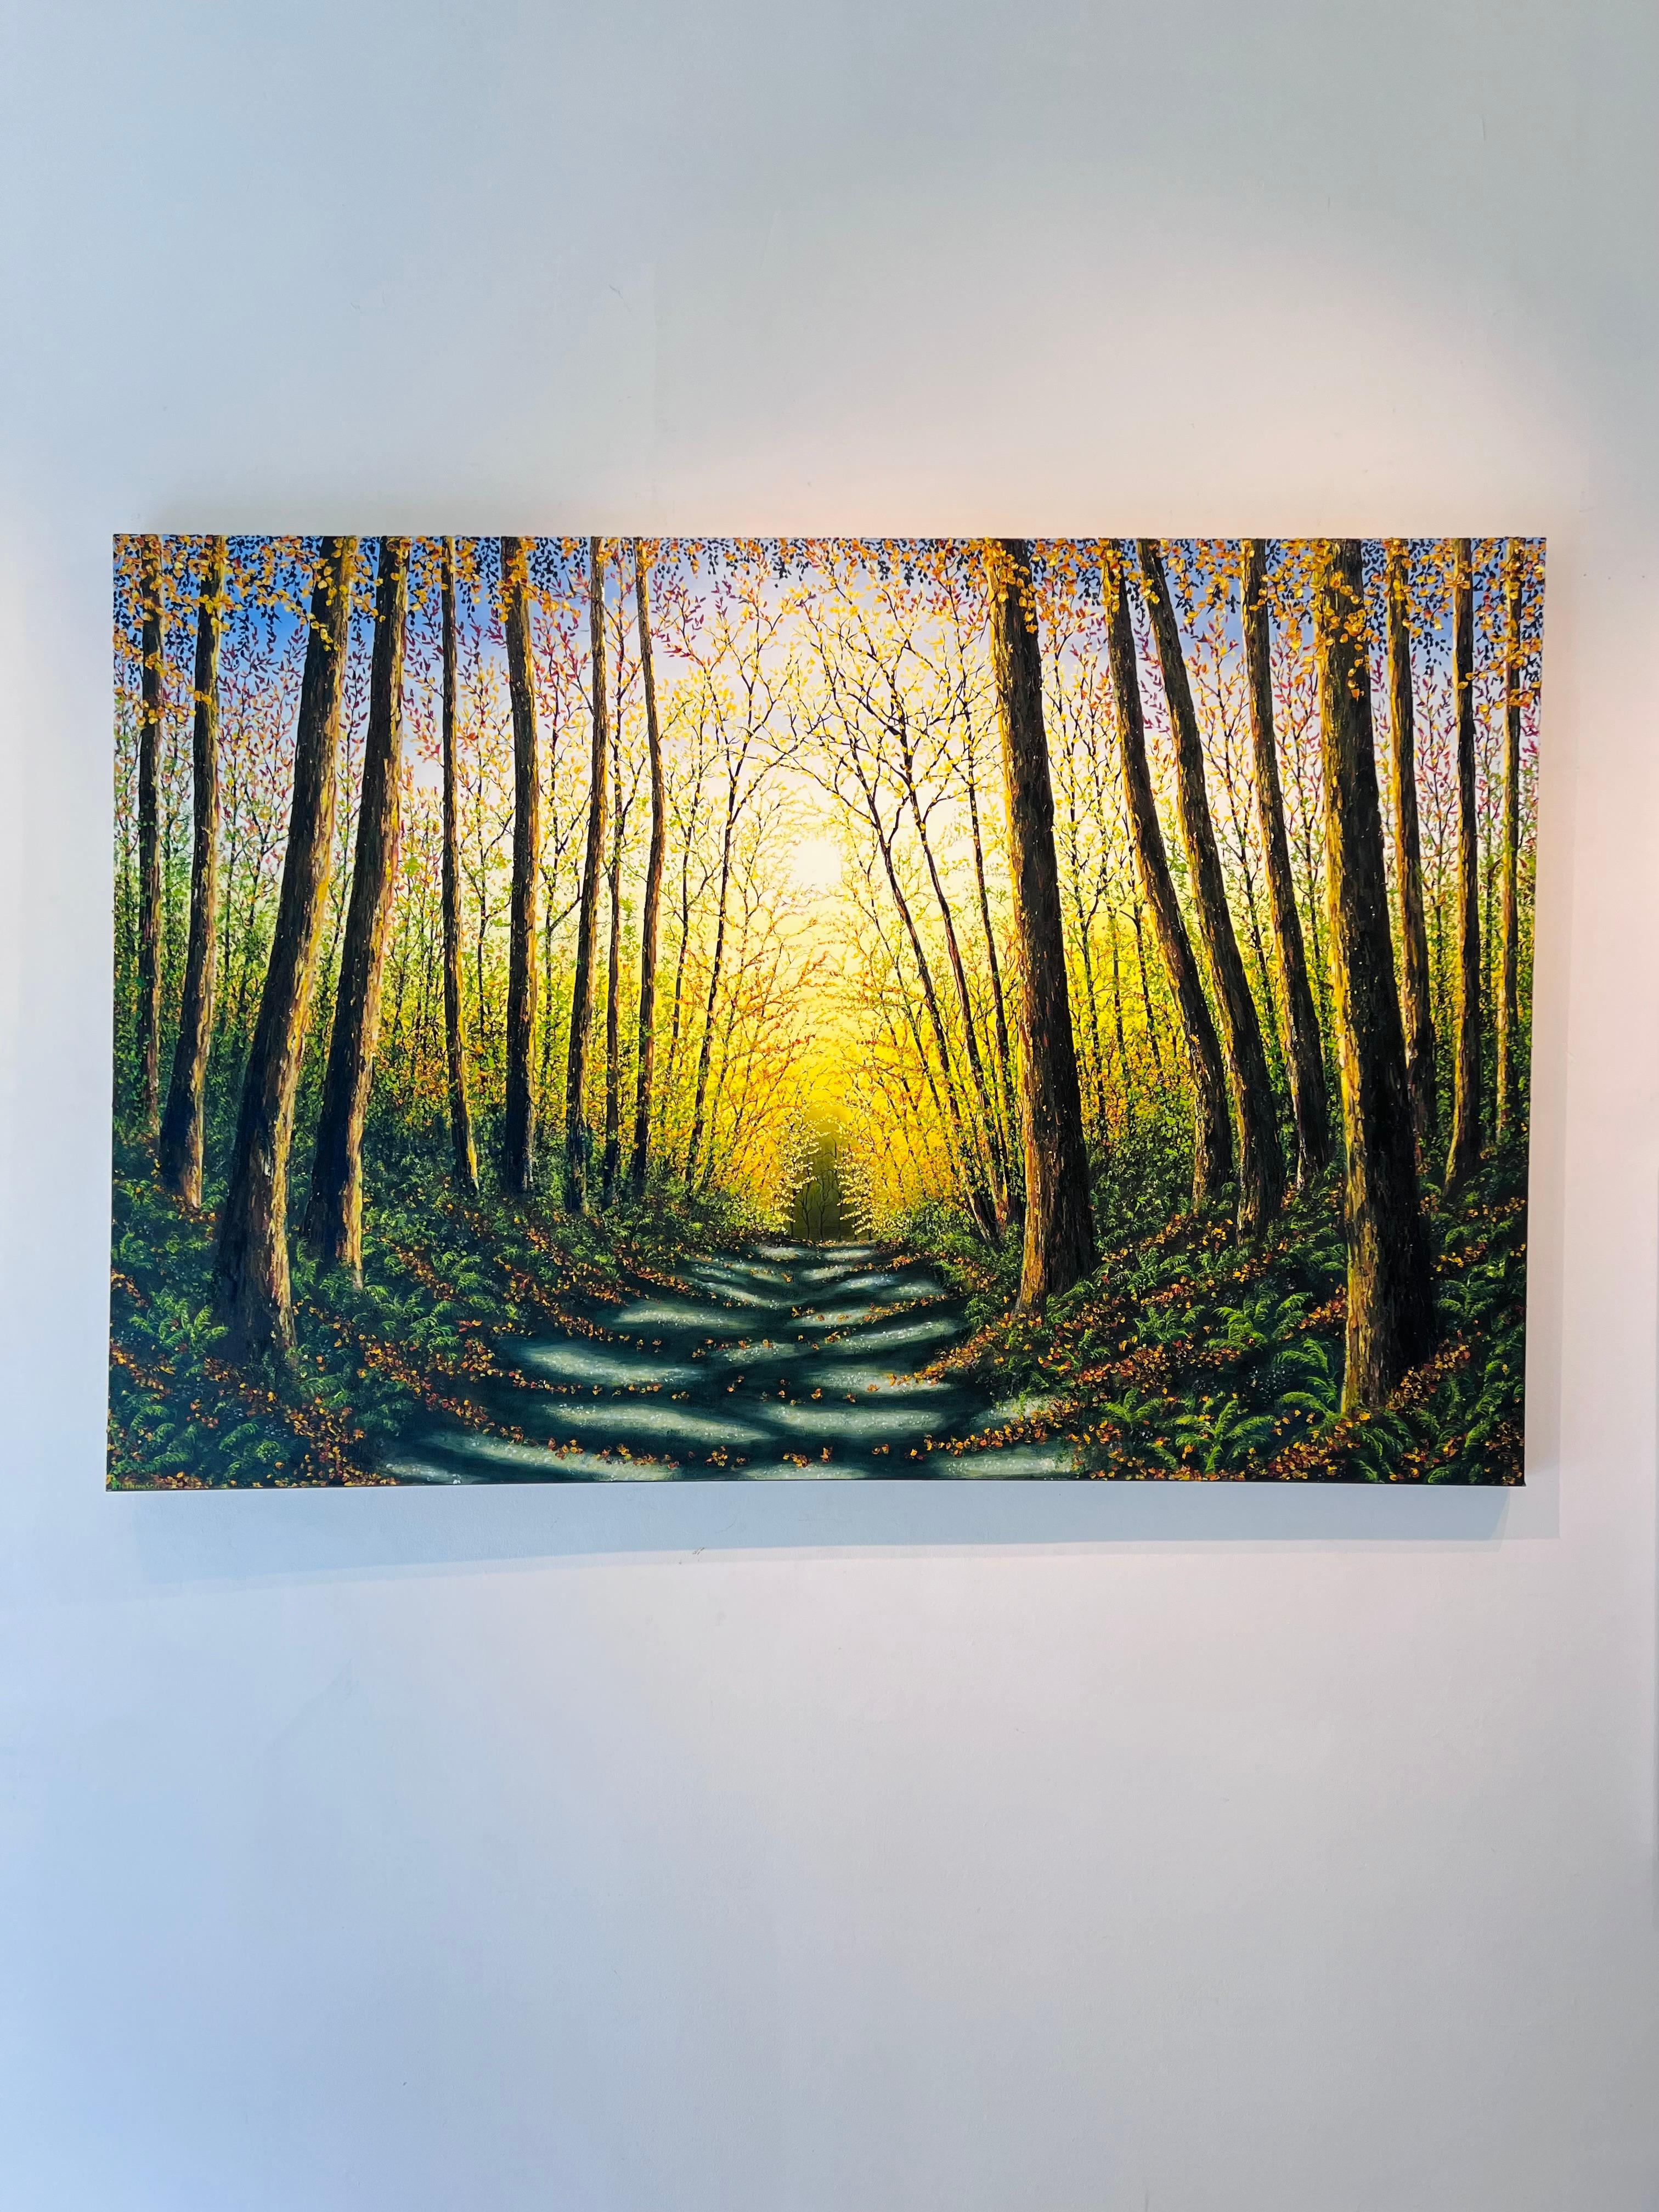 Patterns of Forest - original British landscape oil painting - contemporary art - Painting by Hazel Thomson